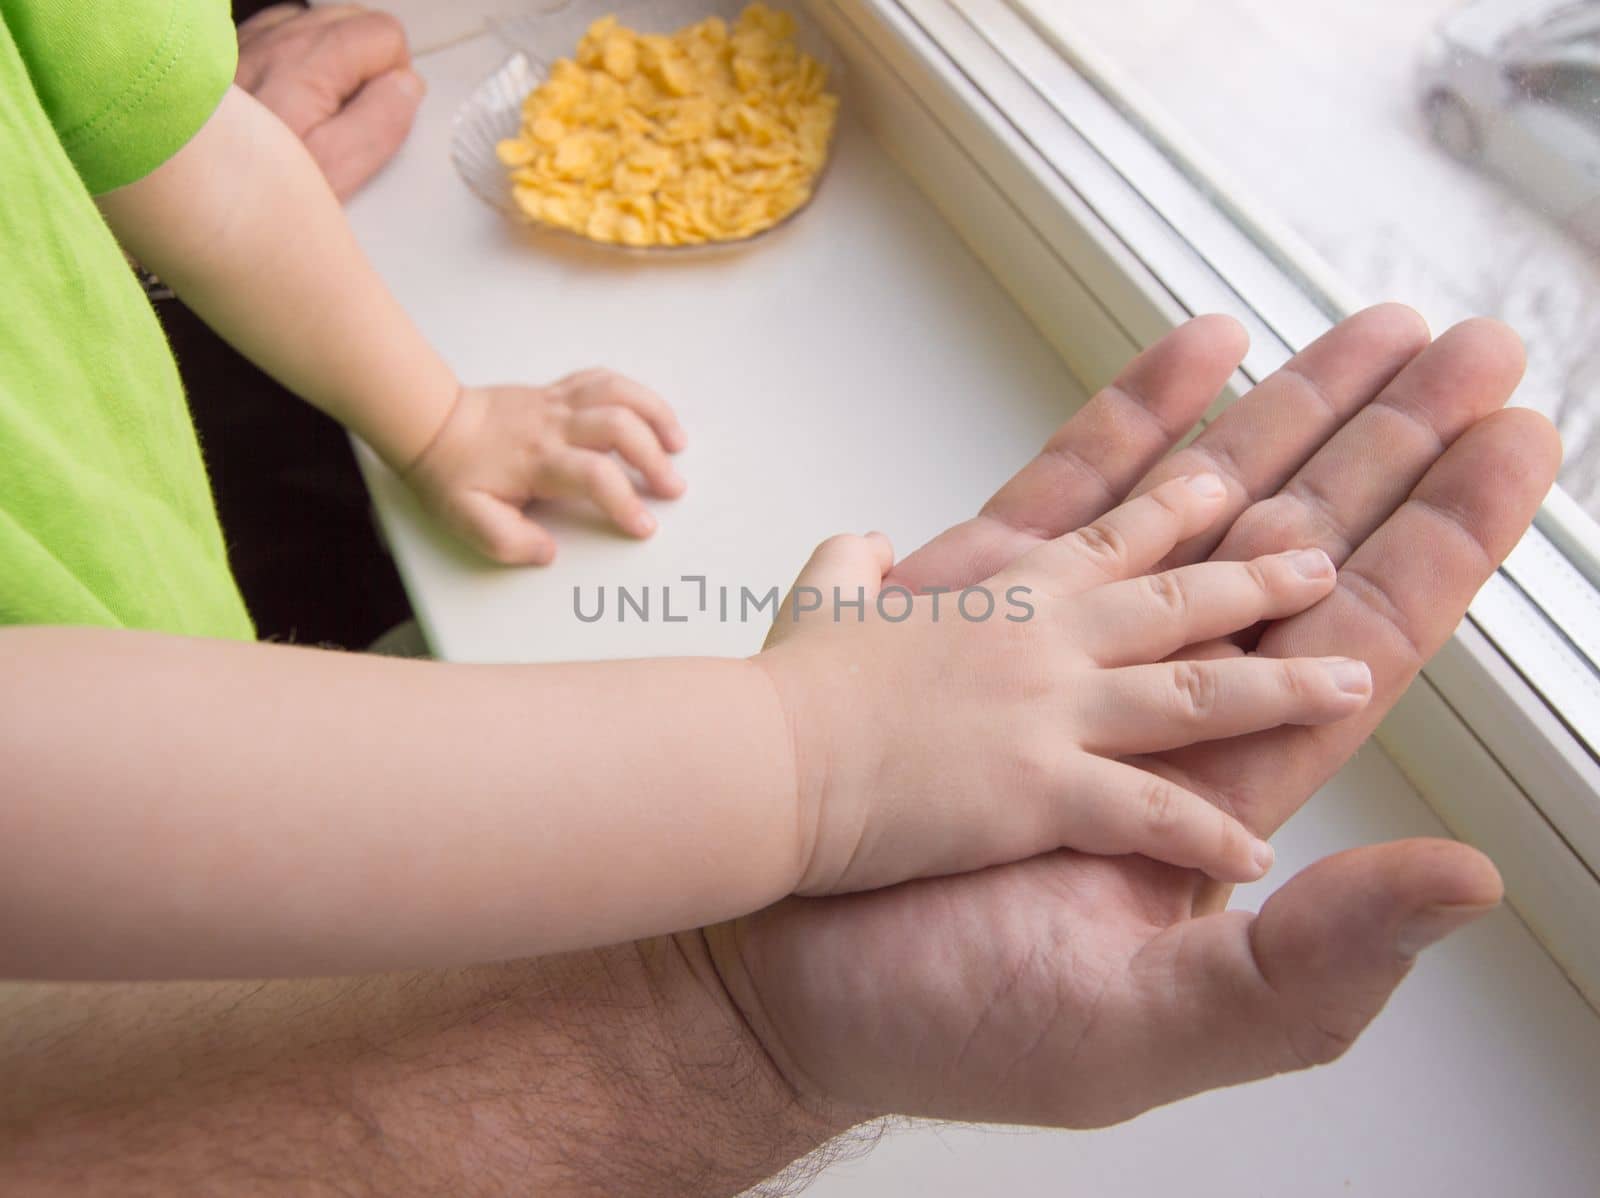 The child's hand rests on the palm of an adult male, child protection.